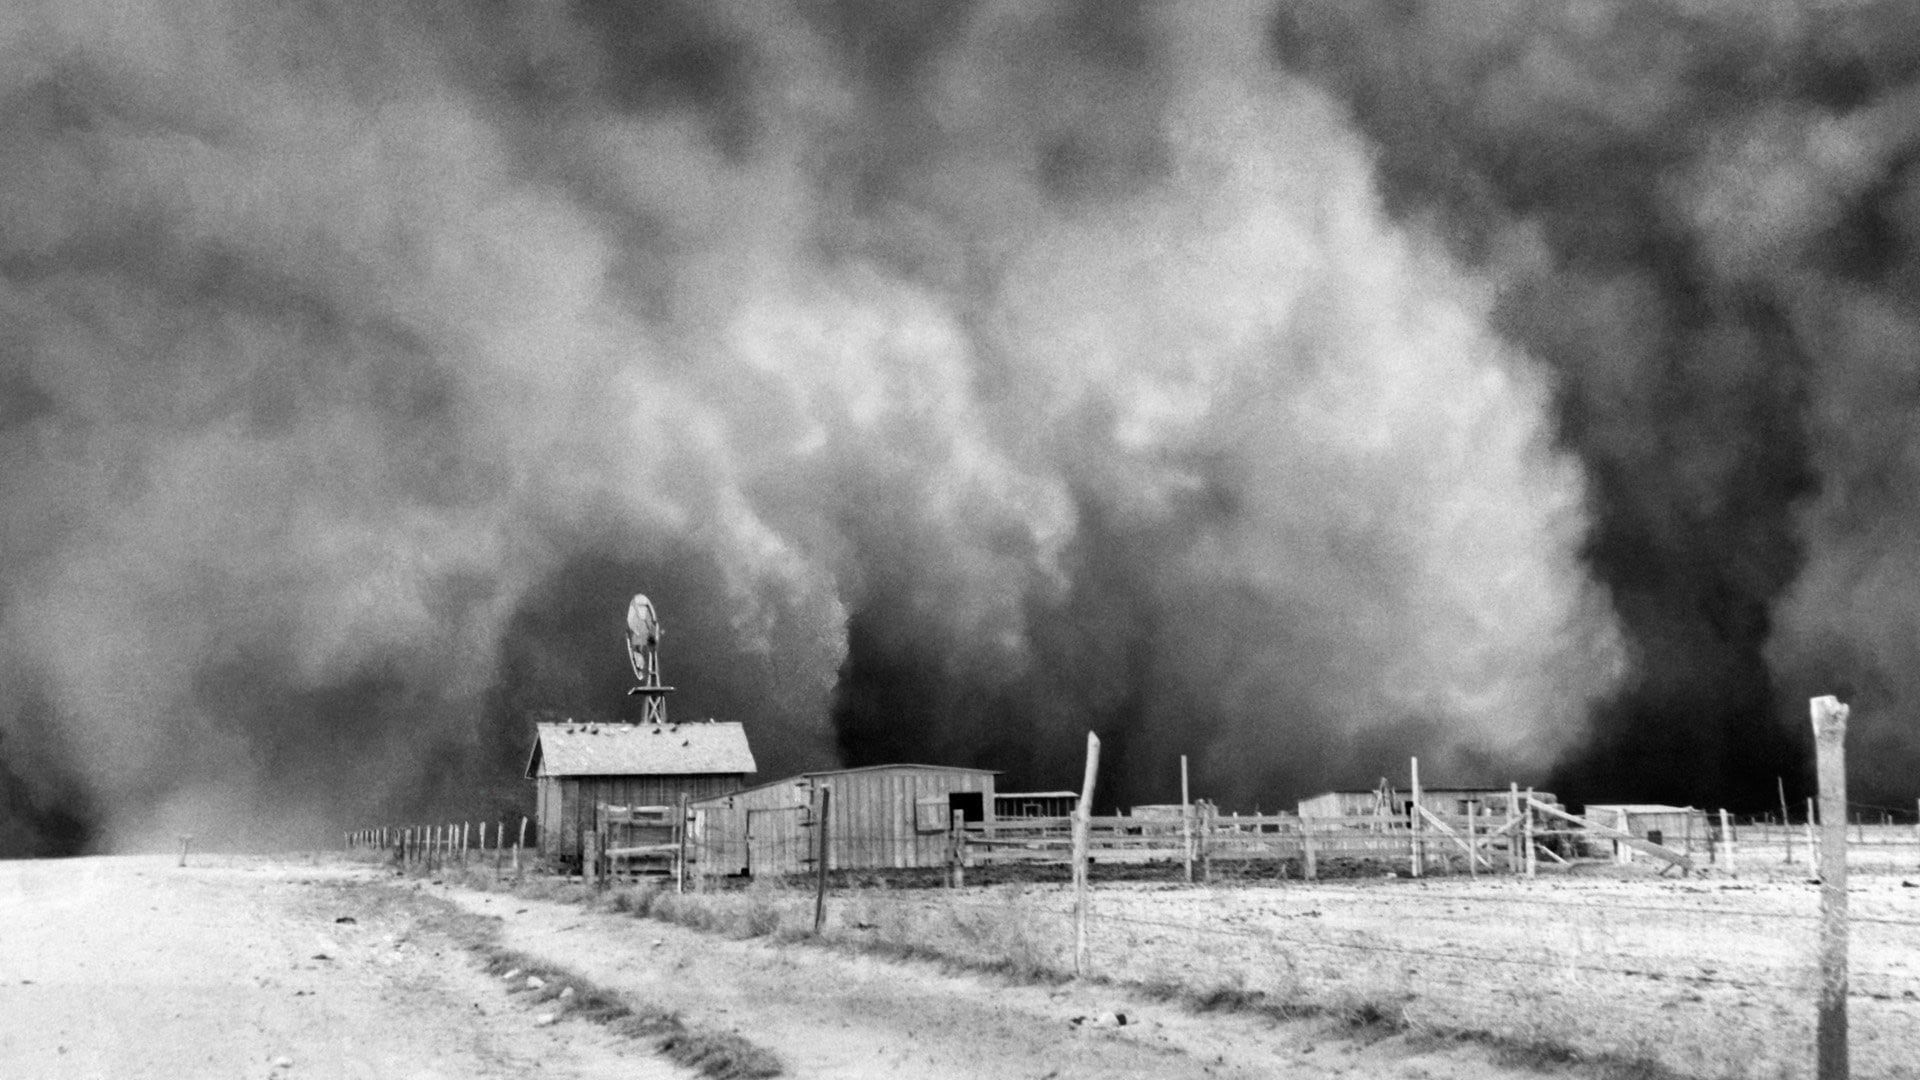 The Dust Bowl background